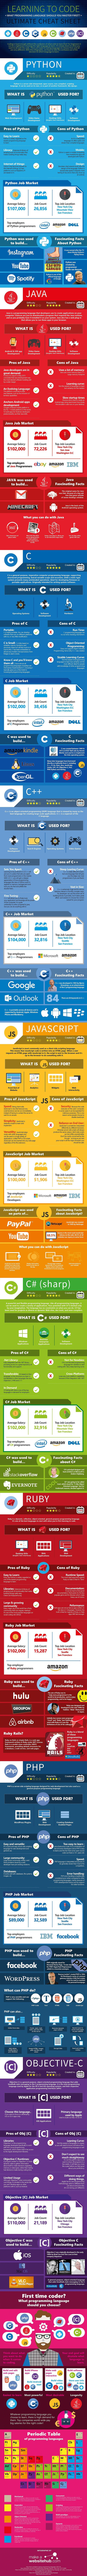 Should You Learn Python, C, or Ruby to Be a Top Coder? (Infographic) - LifeHack